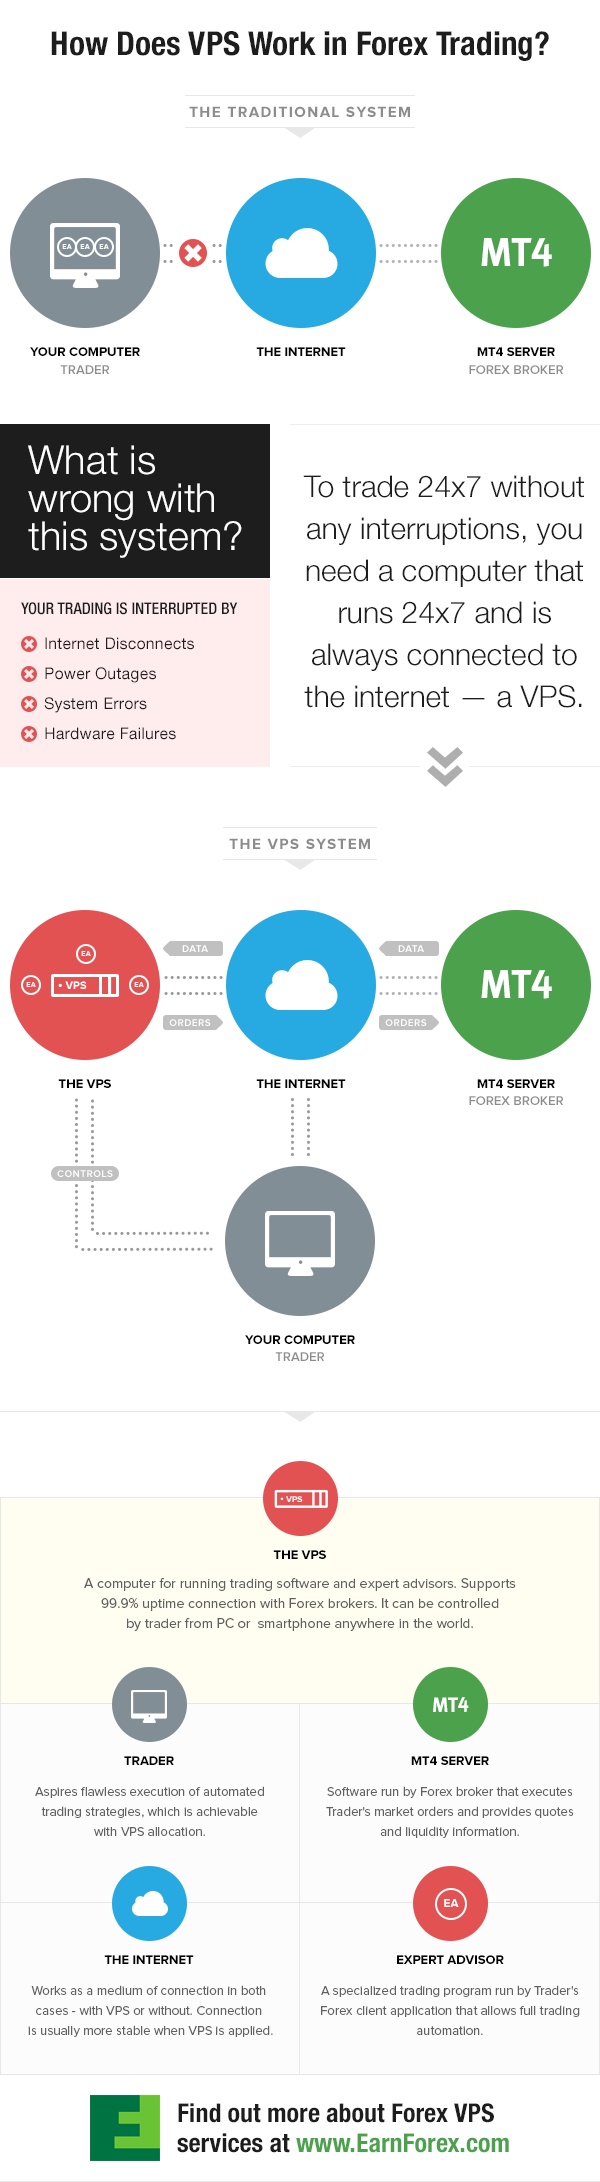 How VPS works in MT4 trading